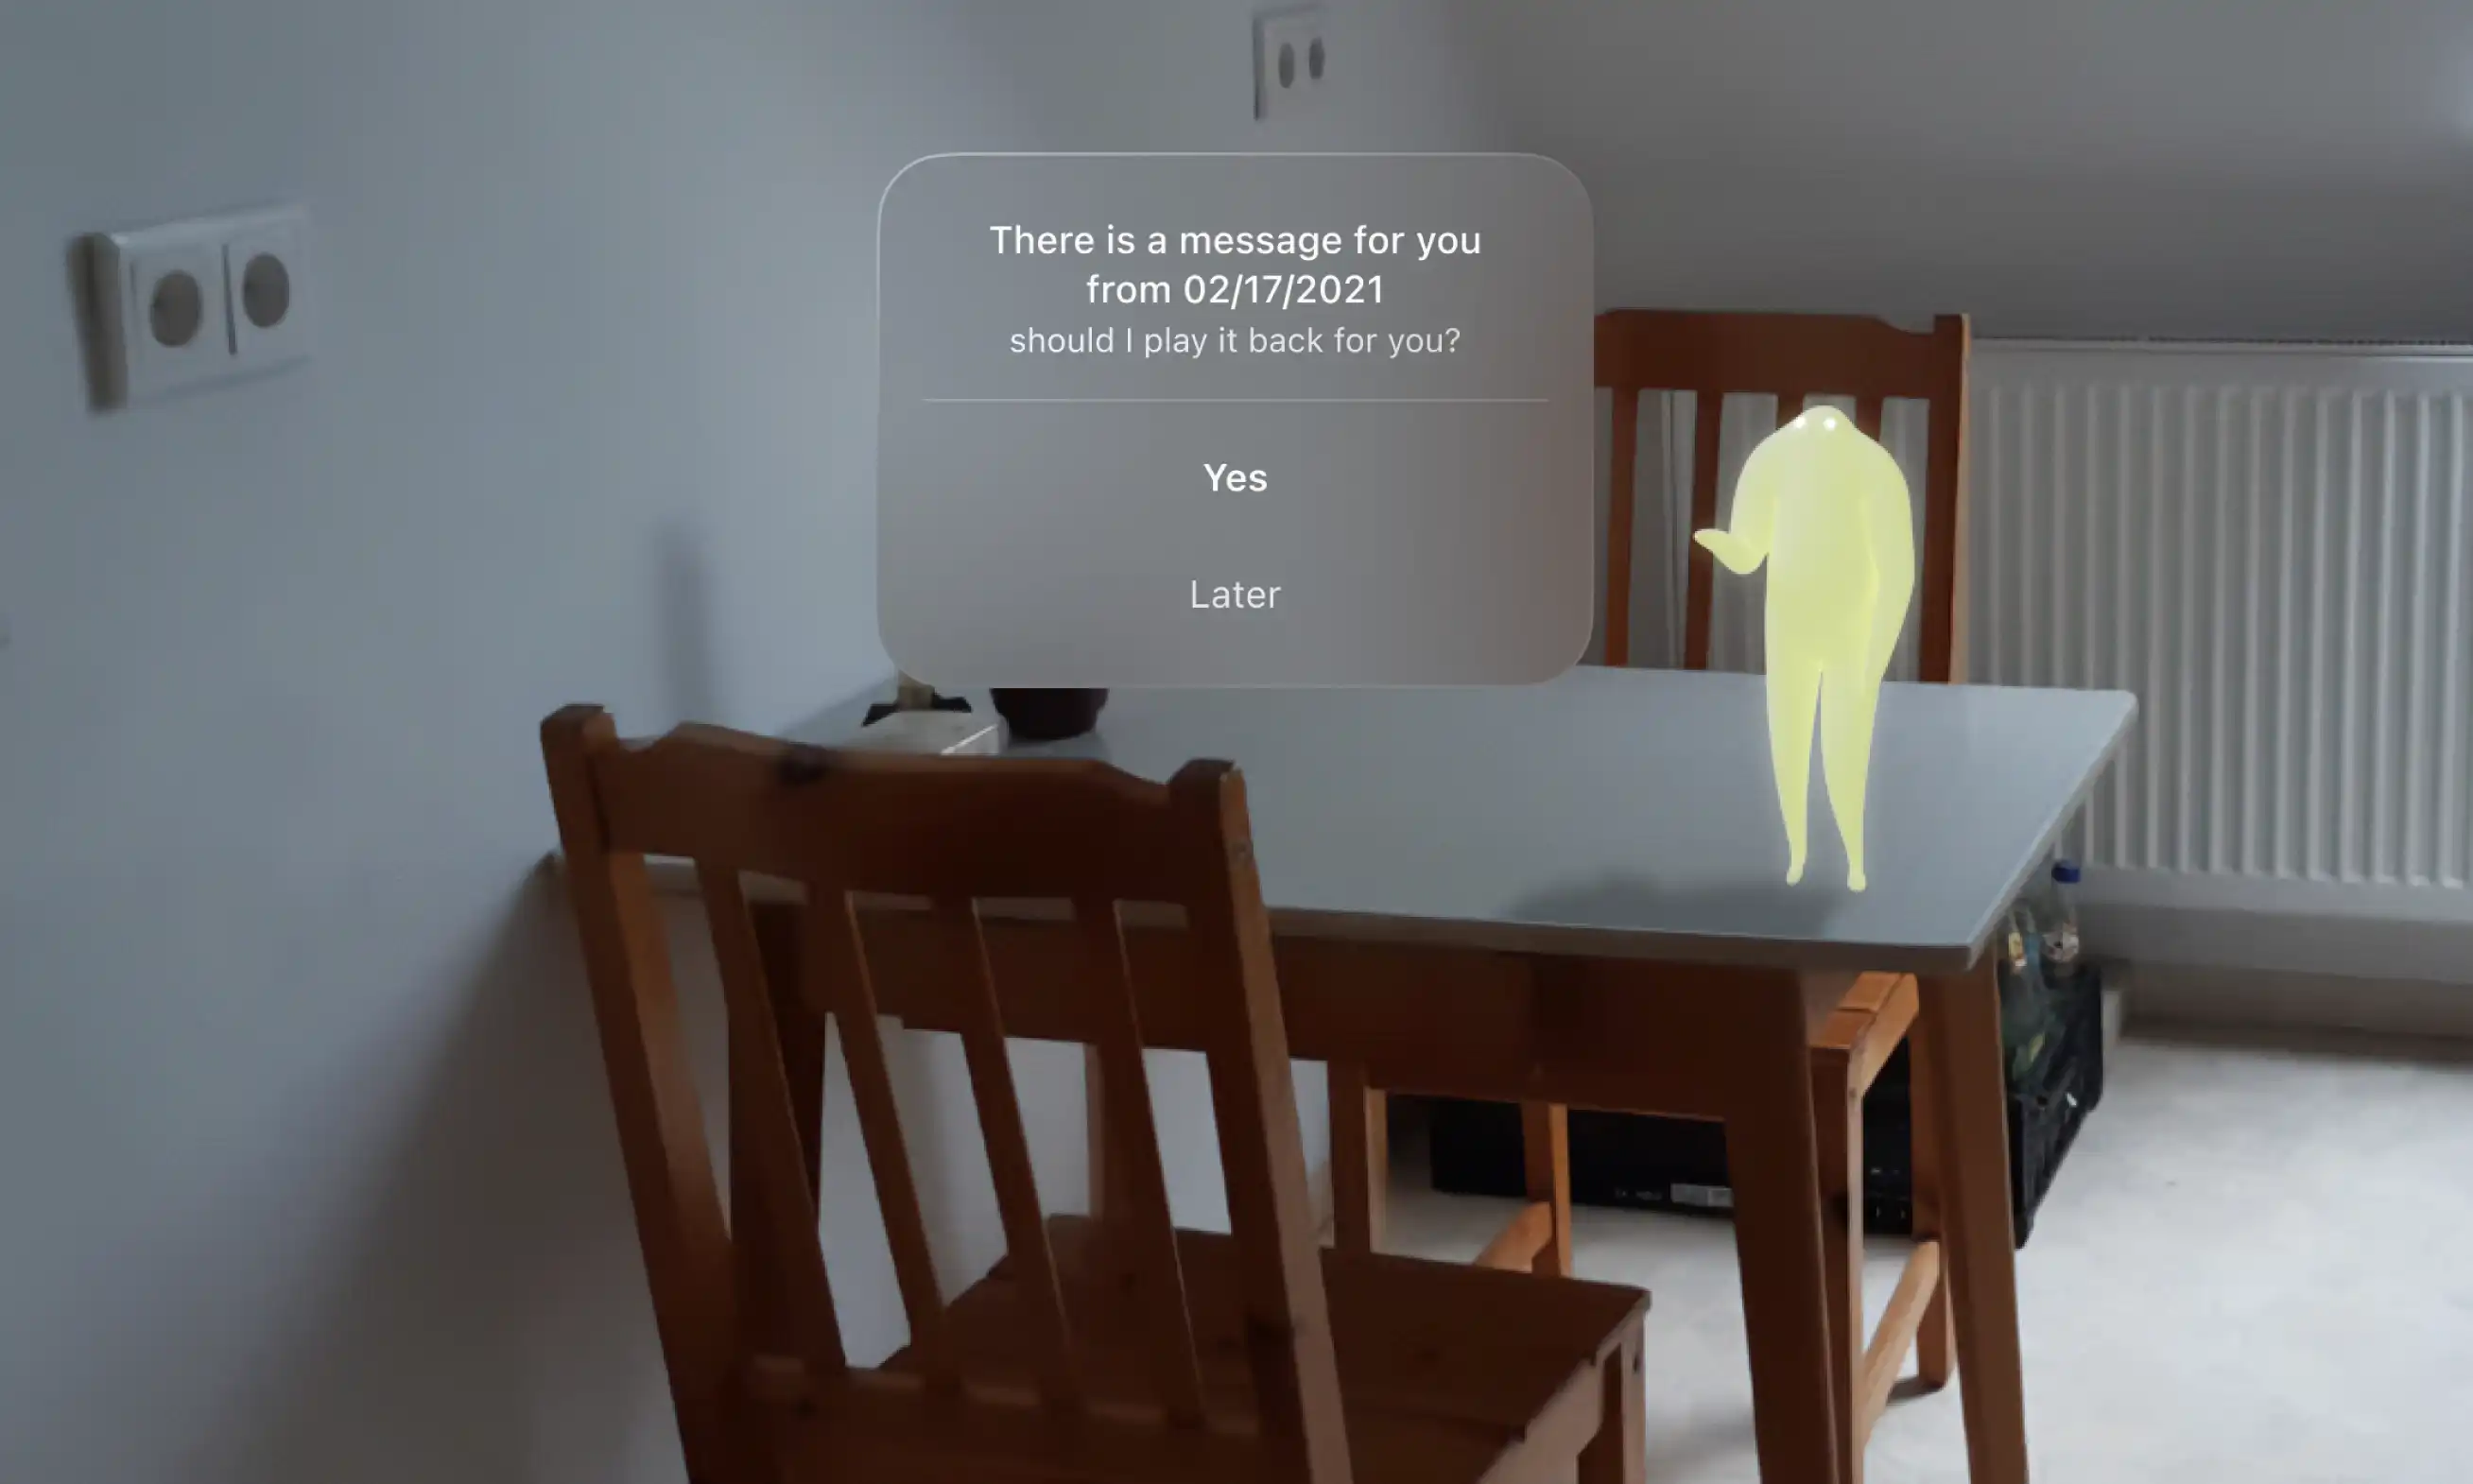 A table with a chair and a white chair in front of it, with an AR character standing on the table.